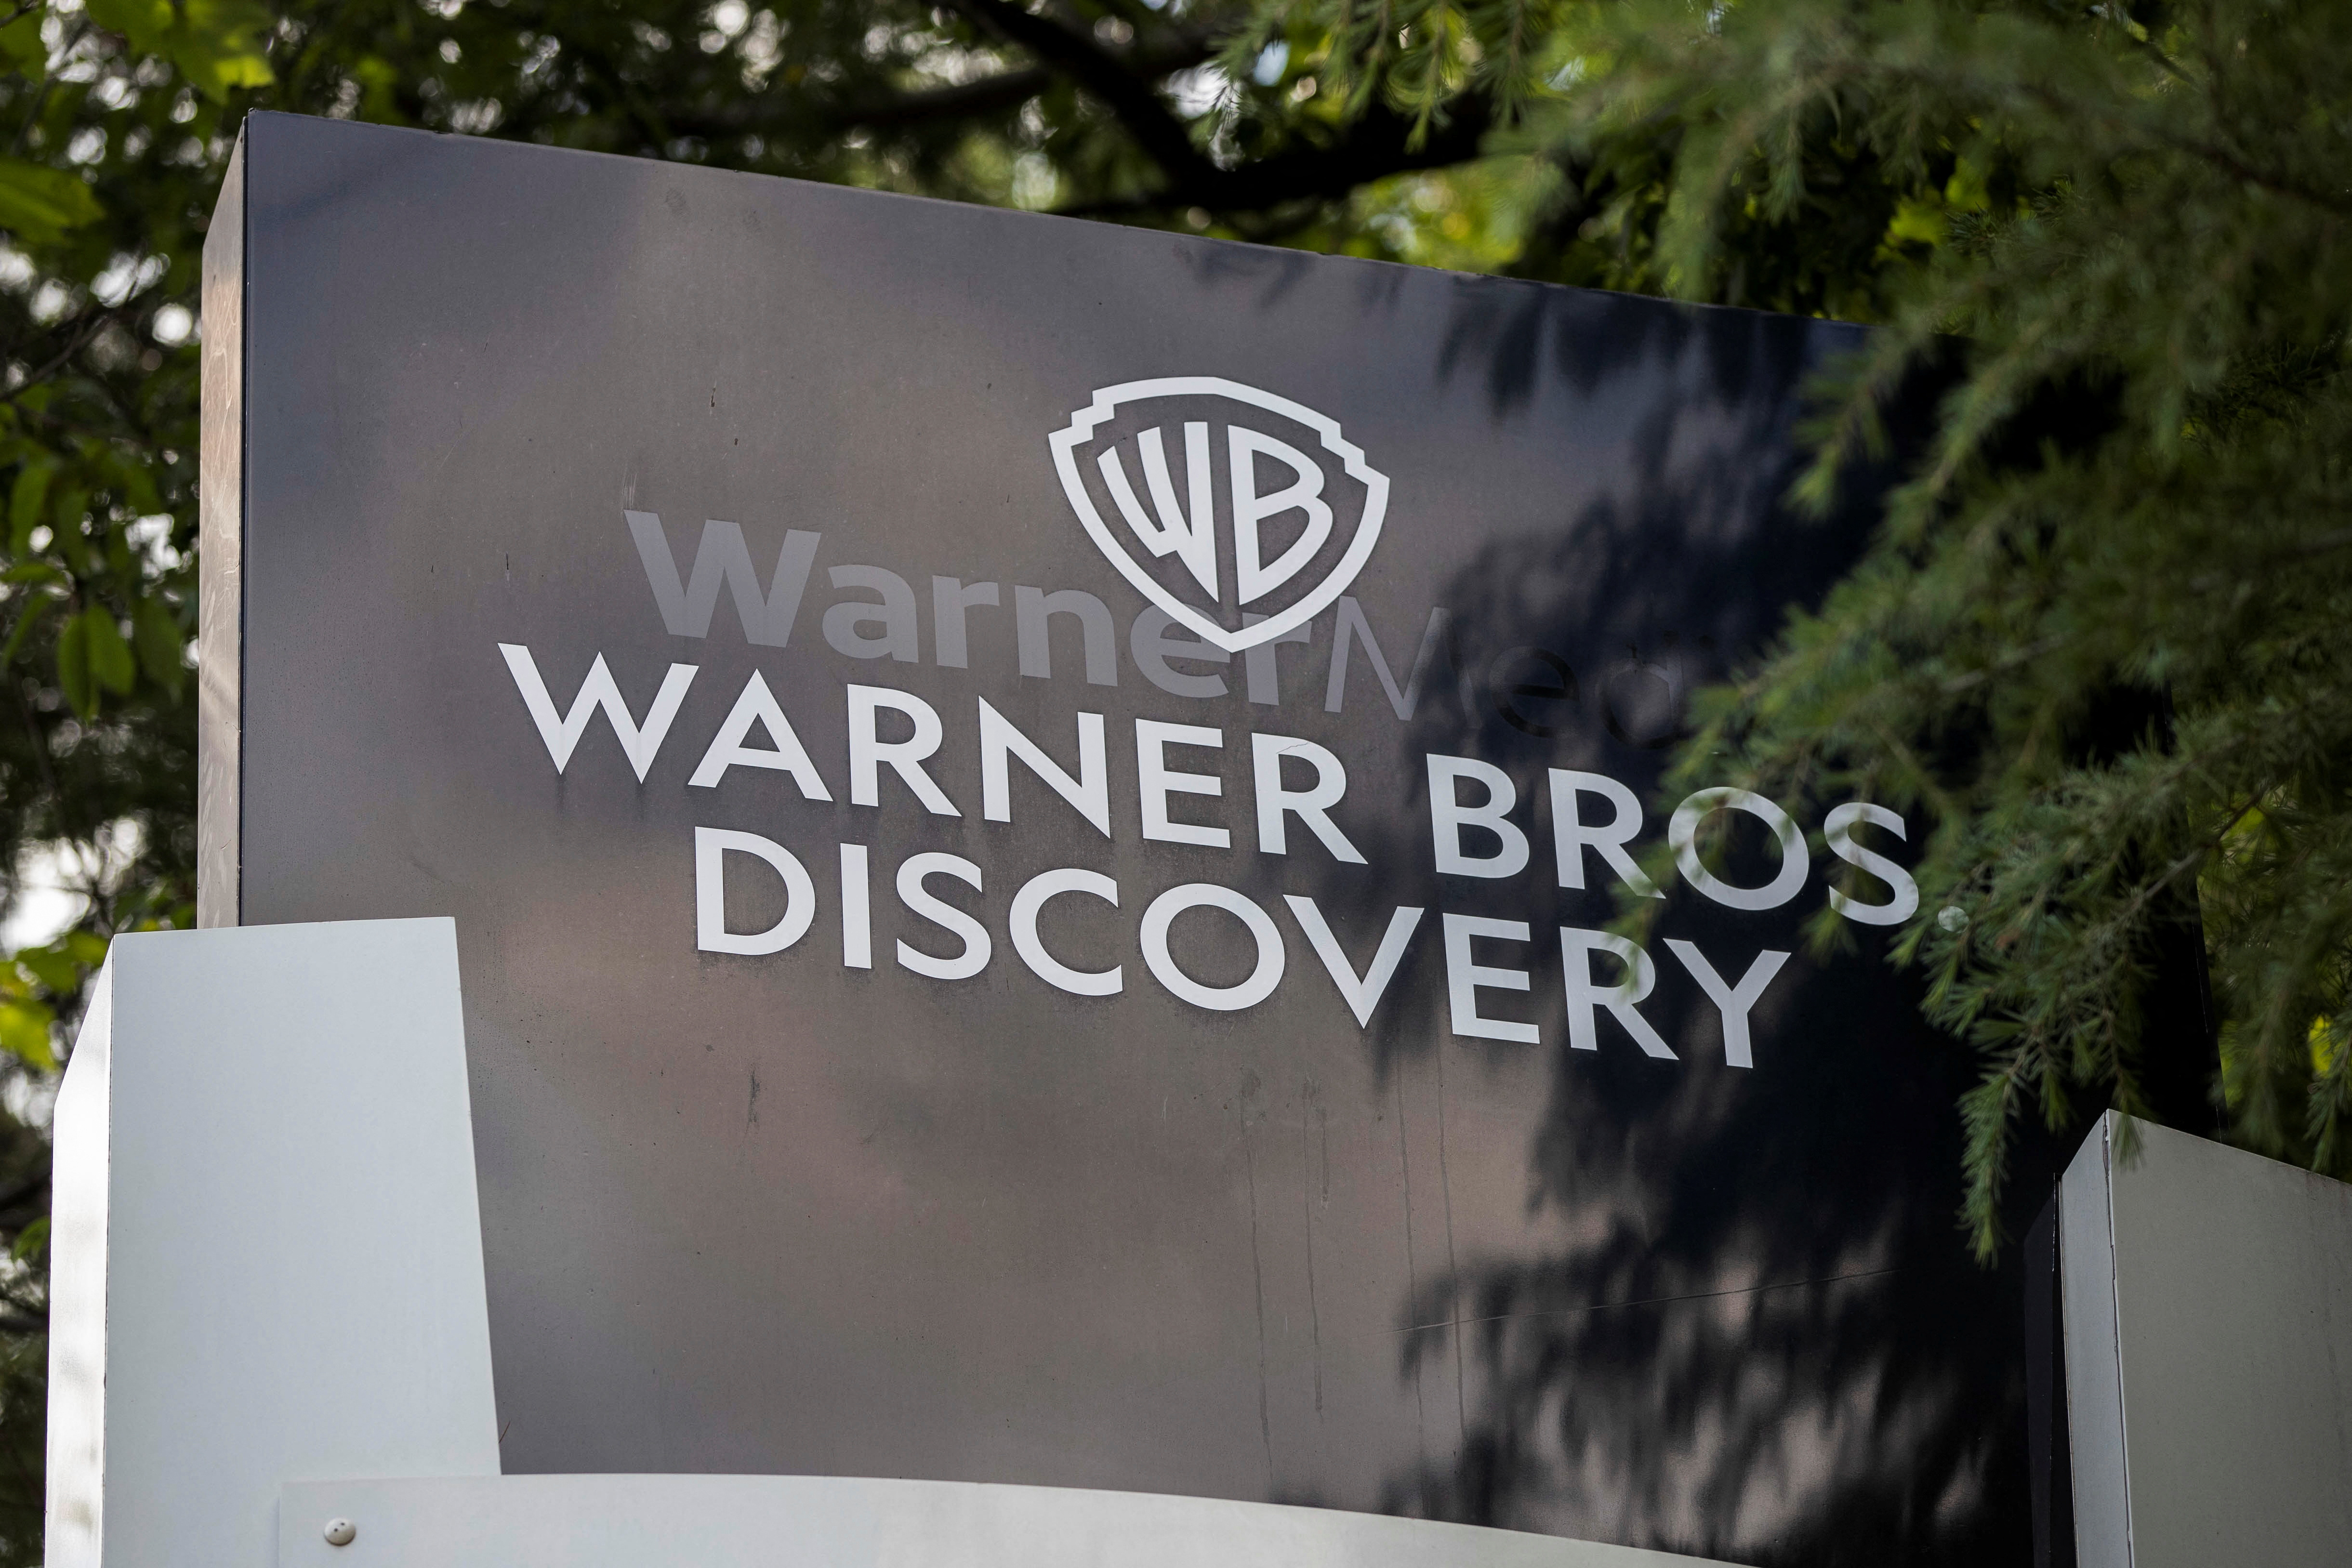 Warner Bros. Doubling Down on Live Service Games